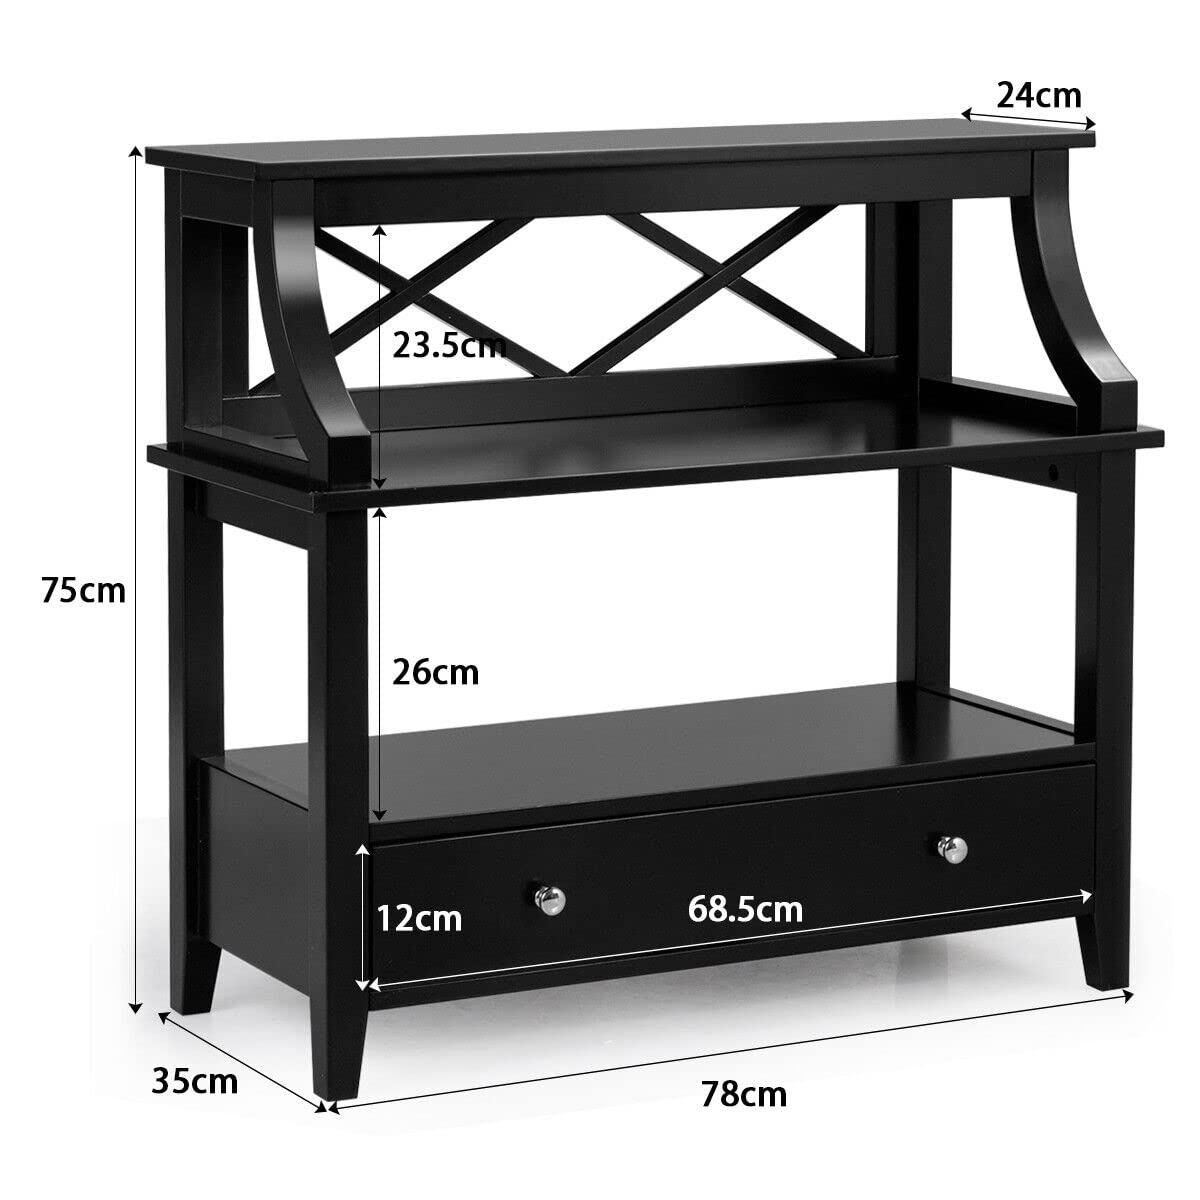 Giantex 3-Tier Console Table Display Stand, Storage Rack Shelf w/Large Capacity Drawer & Wide Open Shelf